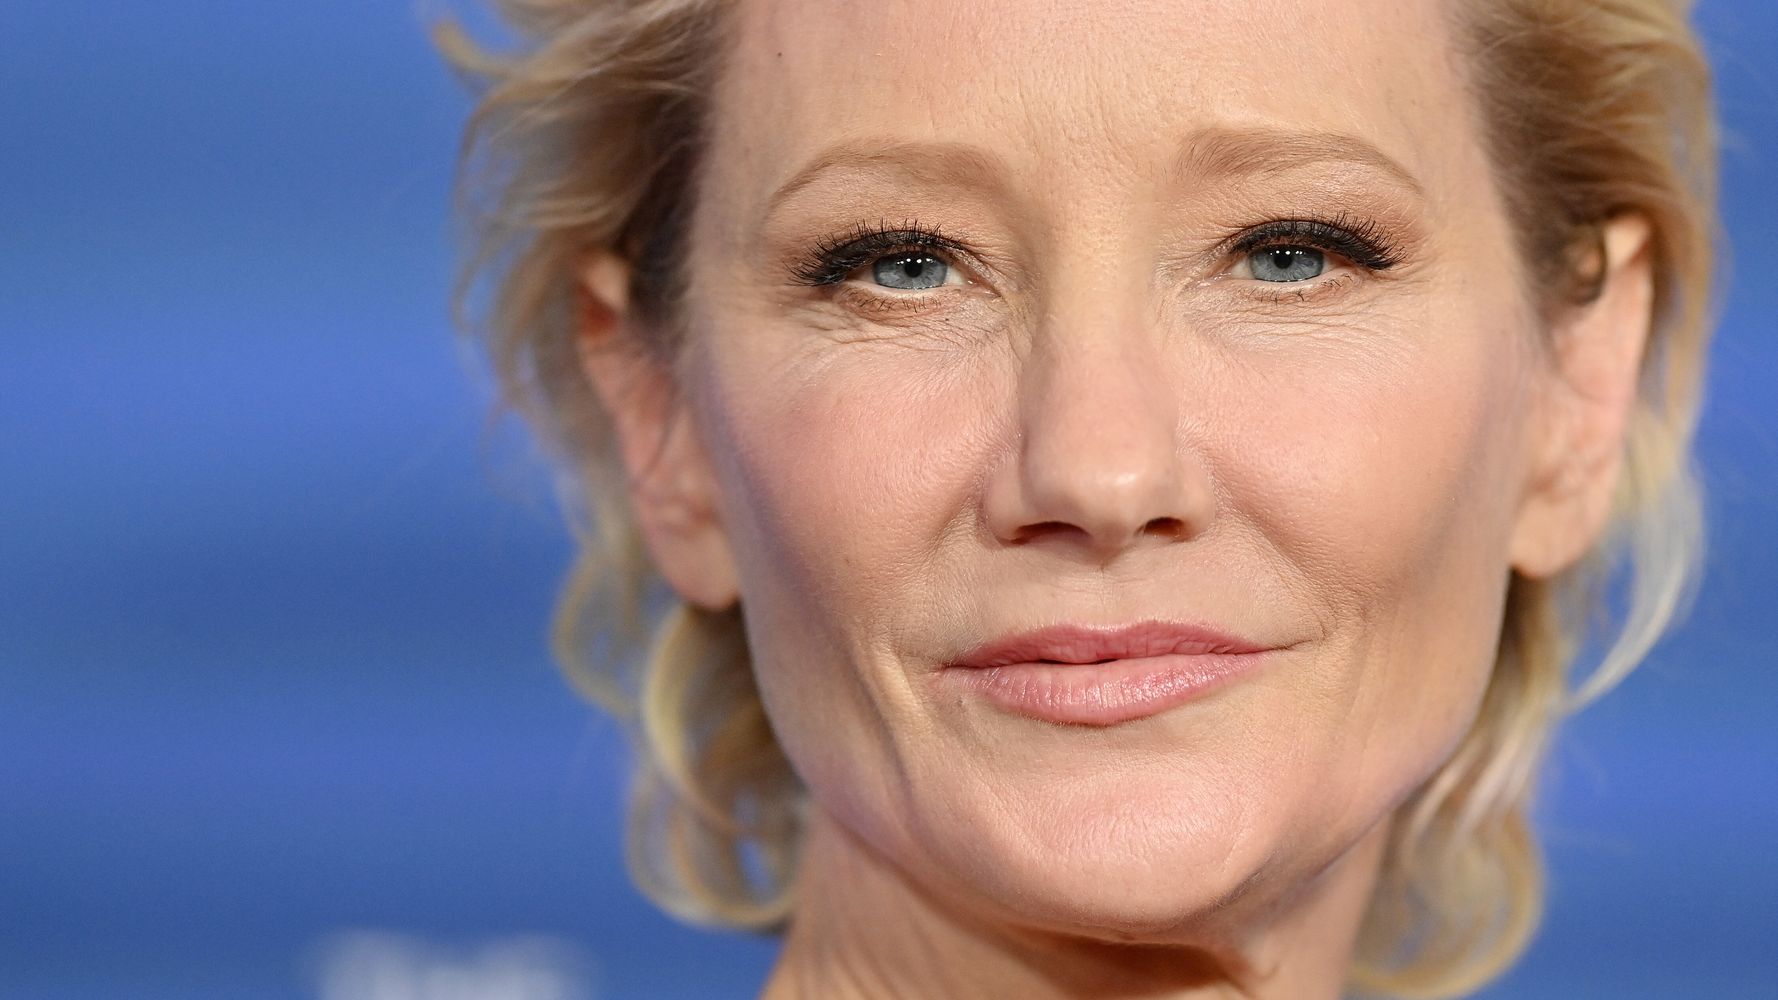 Actor Anne Heche seriously burned after car accident at Los Angeles home: report